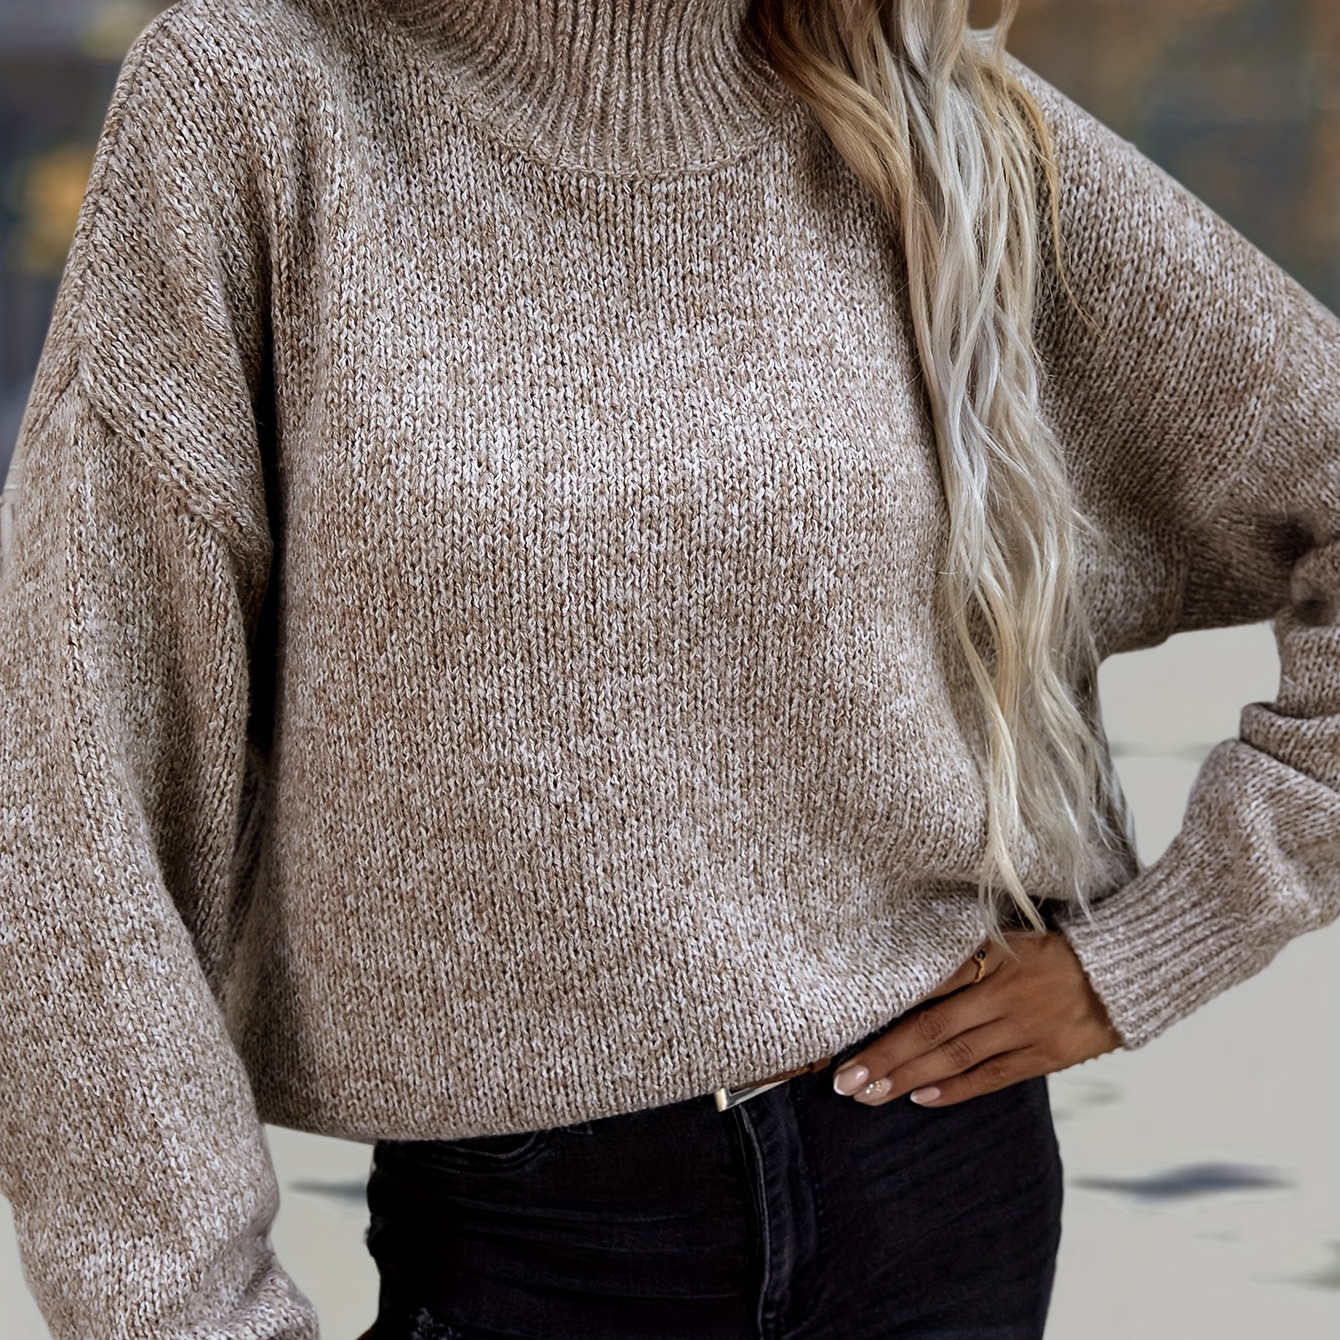 

Solid Turtle Neck Pullover Sweater, Vintage Long Sleeve Drop Shoulder Sweater, Women's Clothing